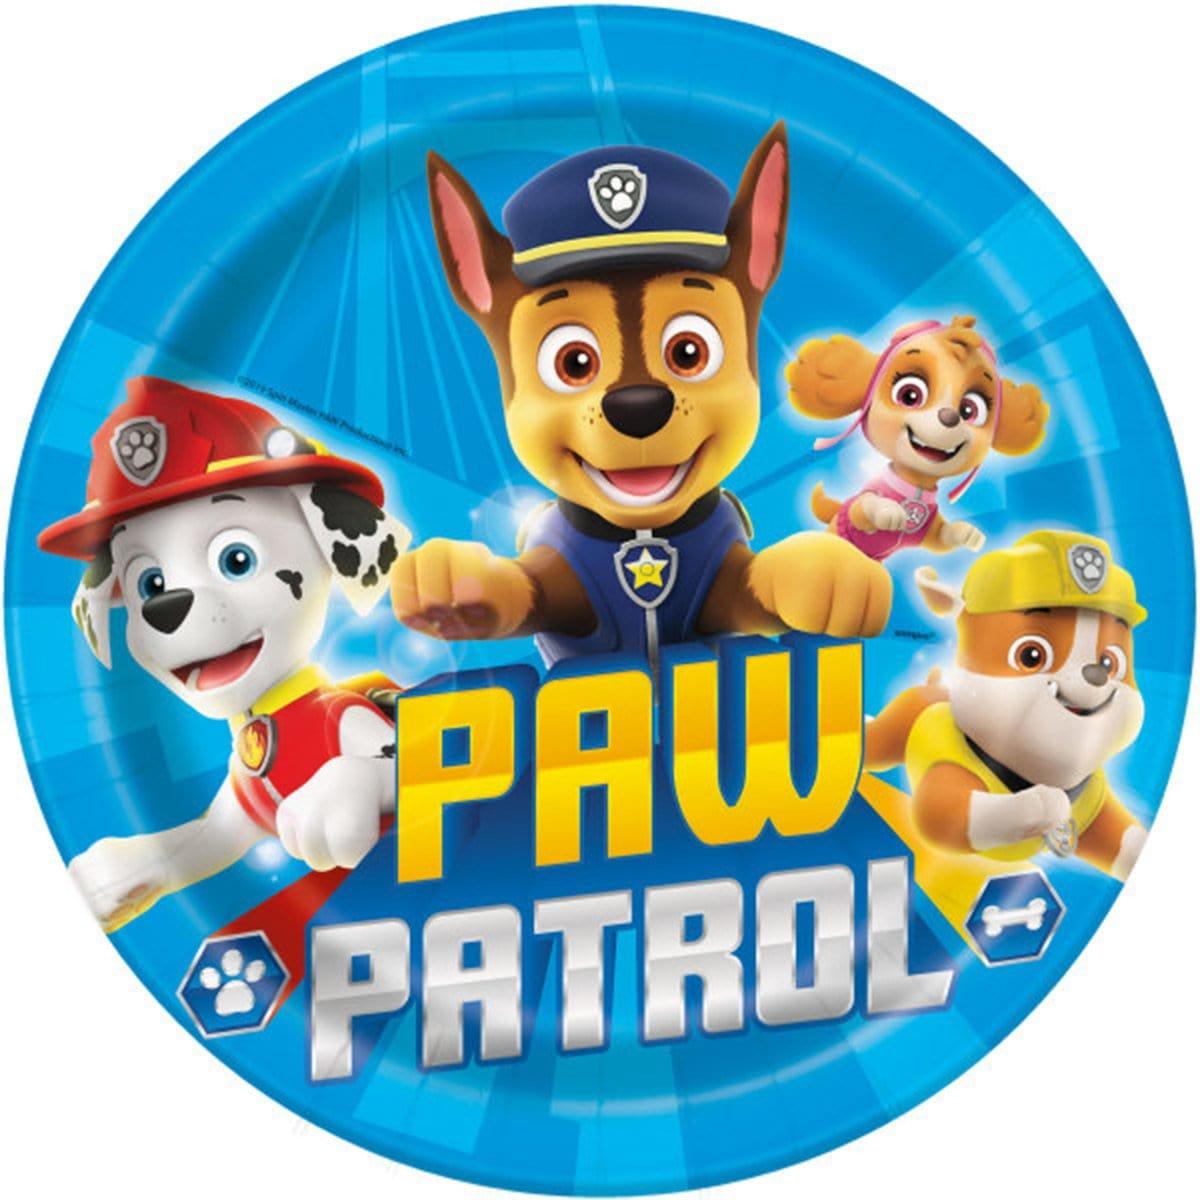 Buy Kids Birthday Paw Patrol Dinner Plates 9 inches, 8 per package sold at Party Expert